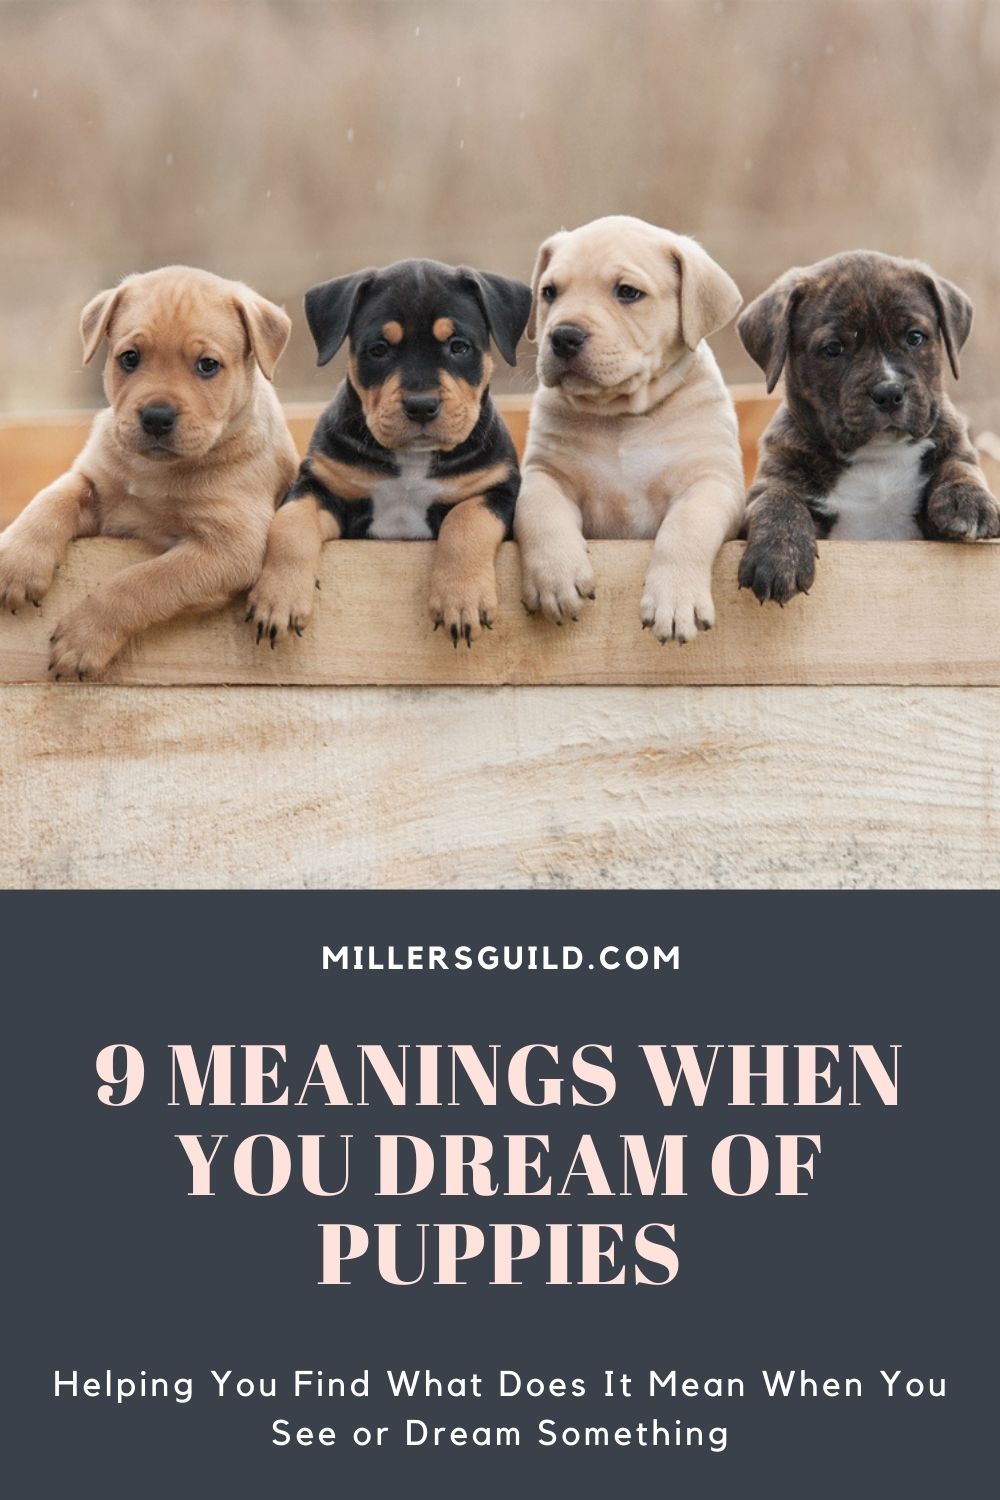 Psychological Meaning Of Puppies In Dreams